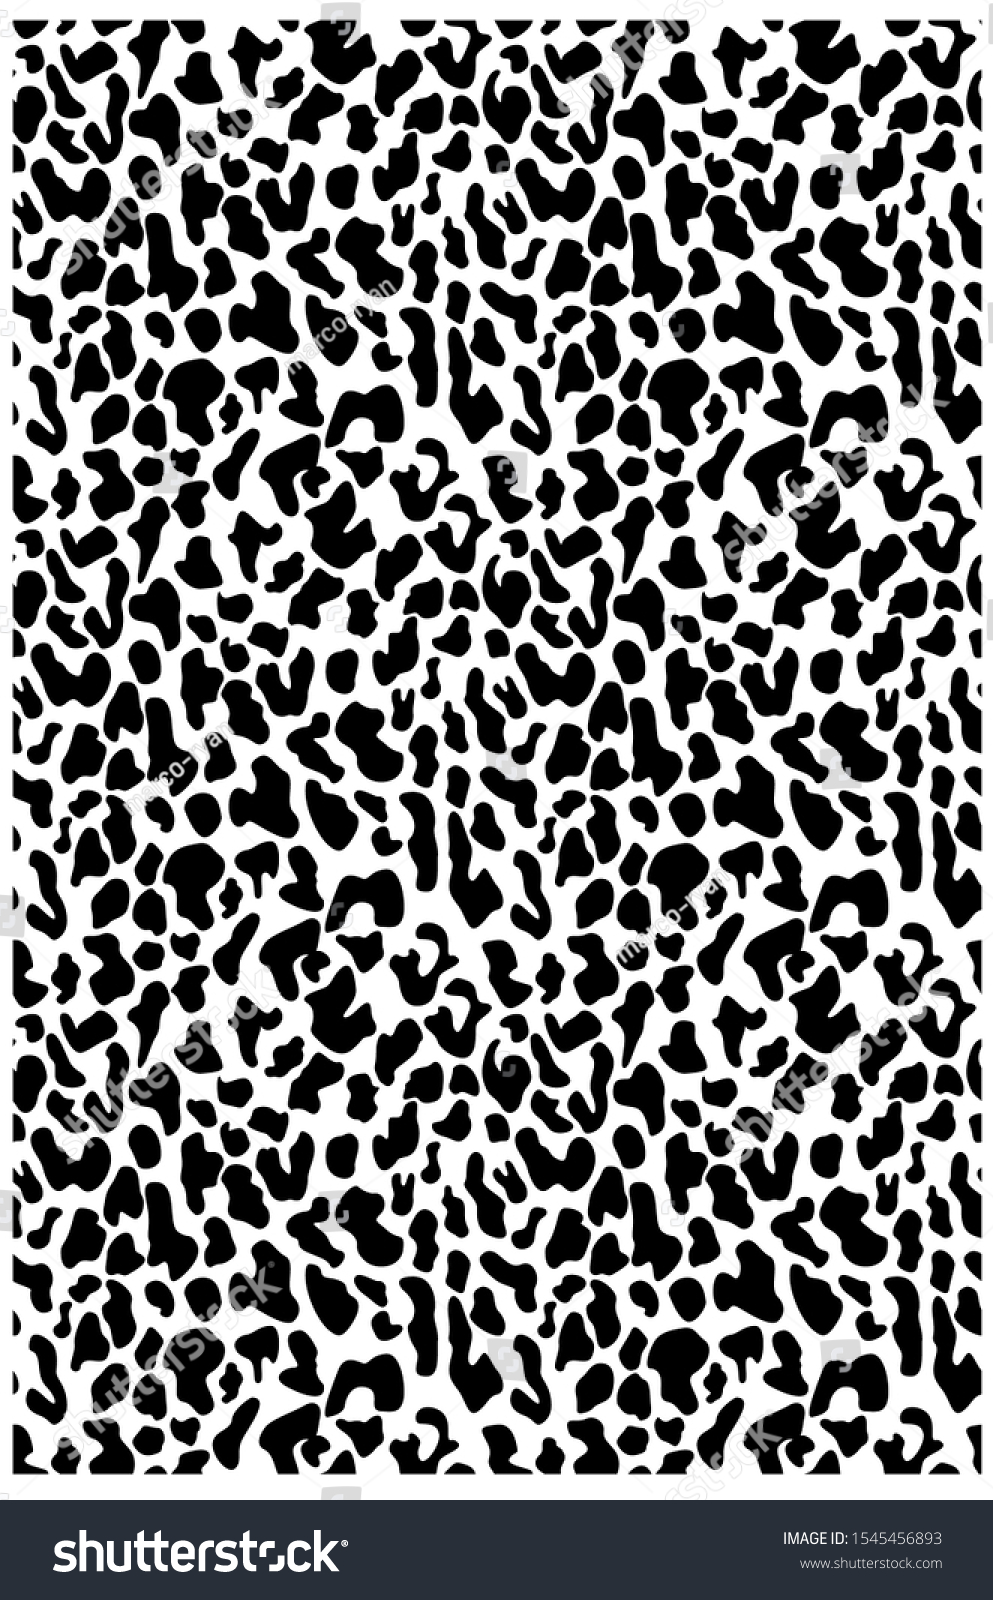 Black White Leopard Pattern Apparel Stock Vector (Royalty Free ...